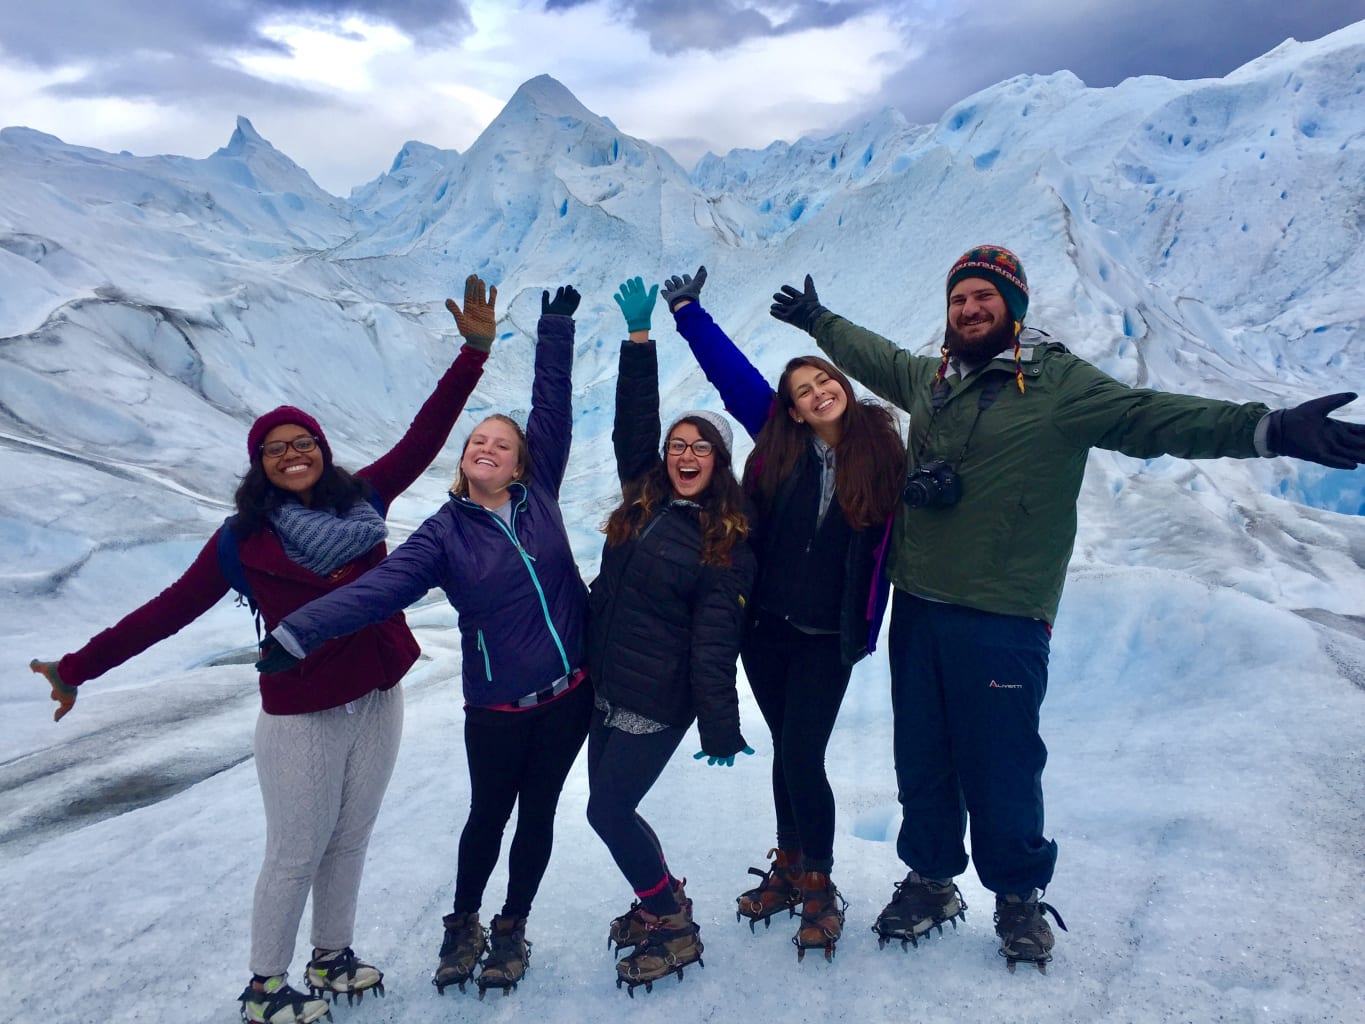 A group of students posing with snowy mountains in the background in Argentina.